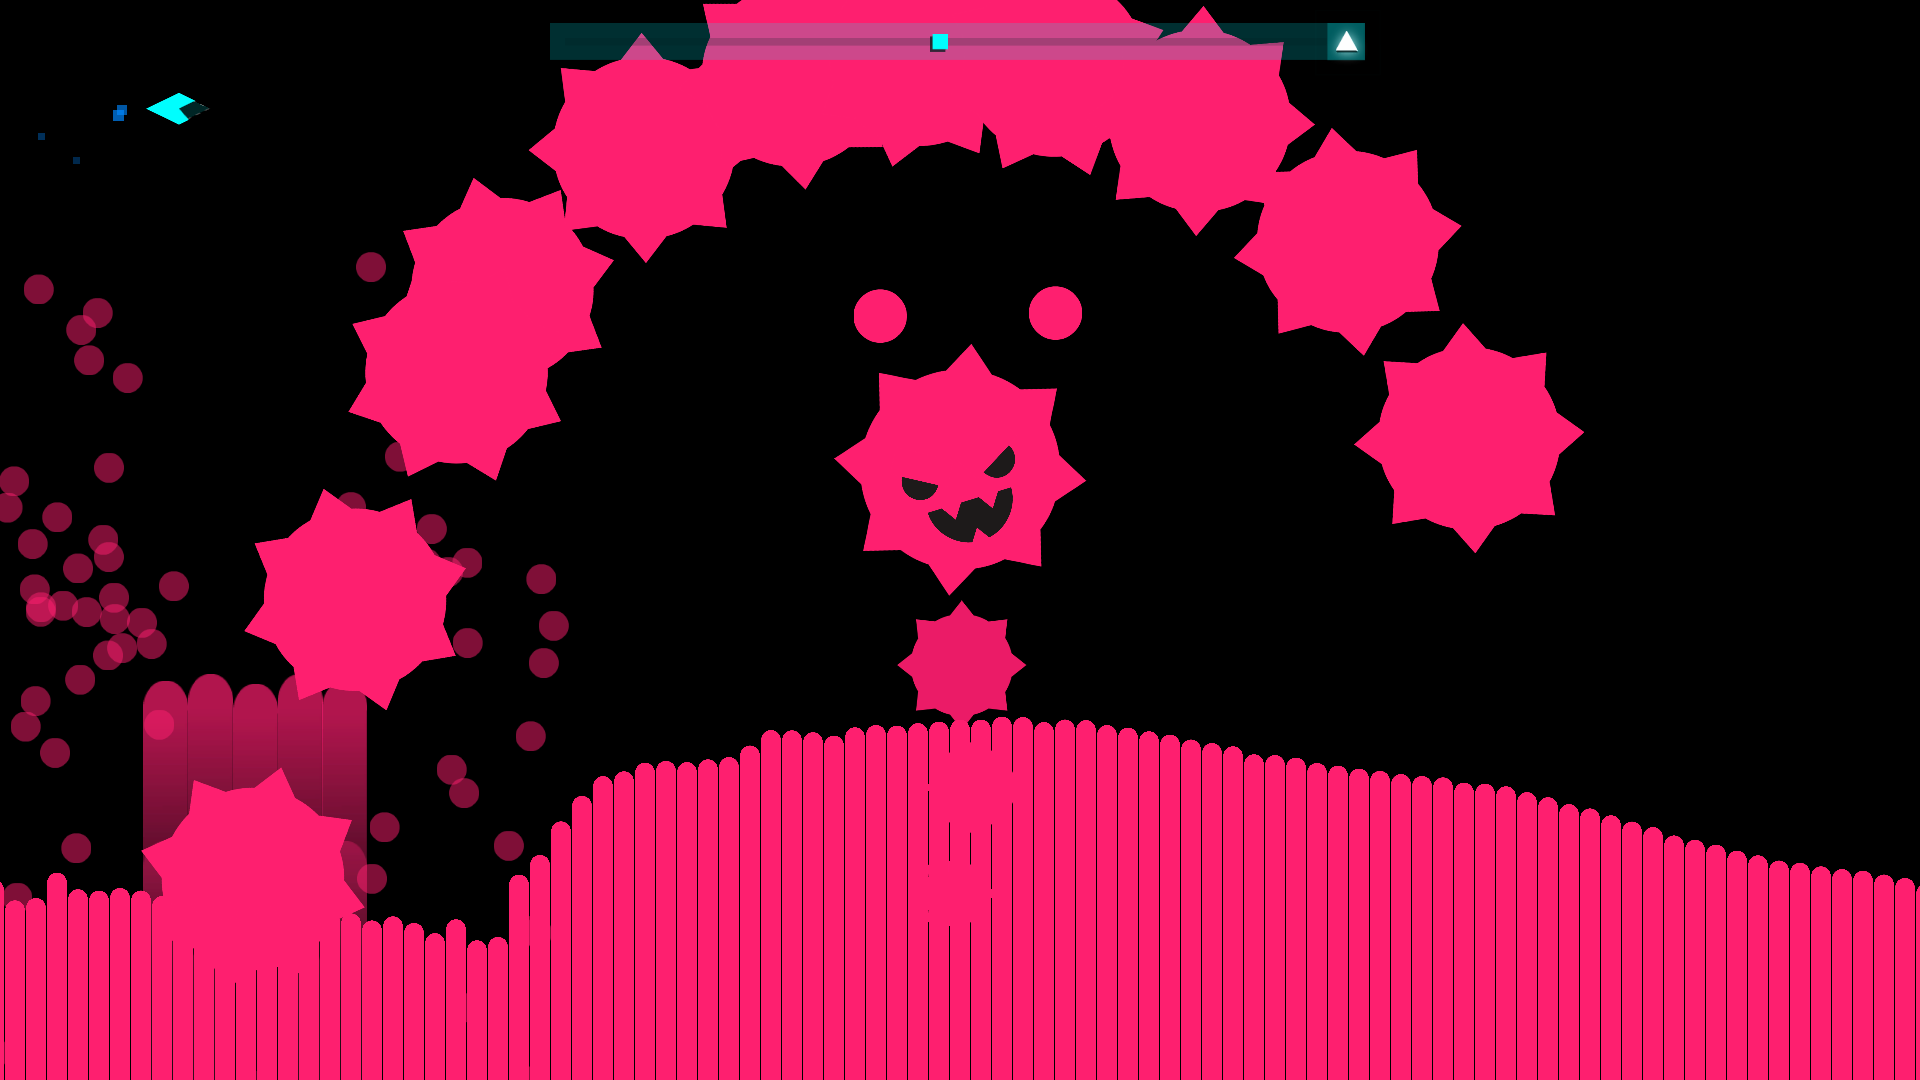 just shapes and beats level editor